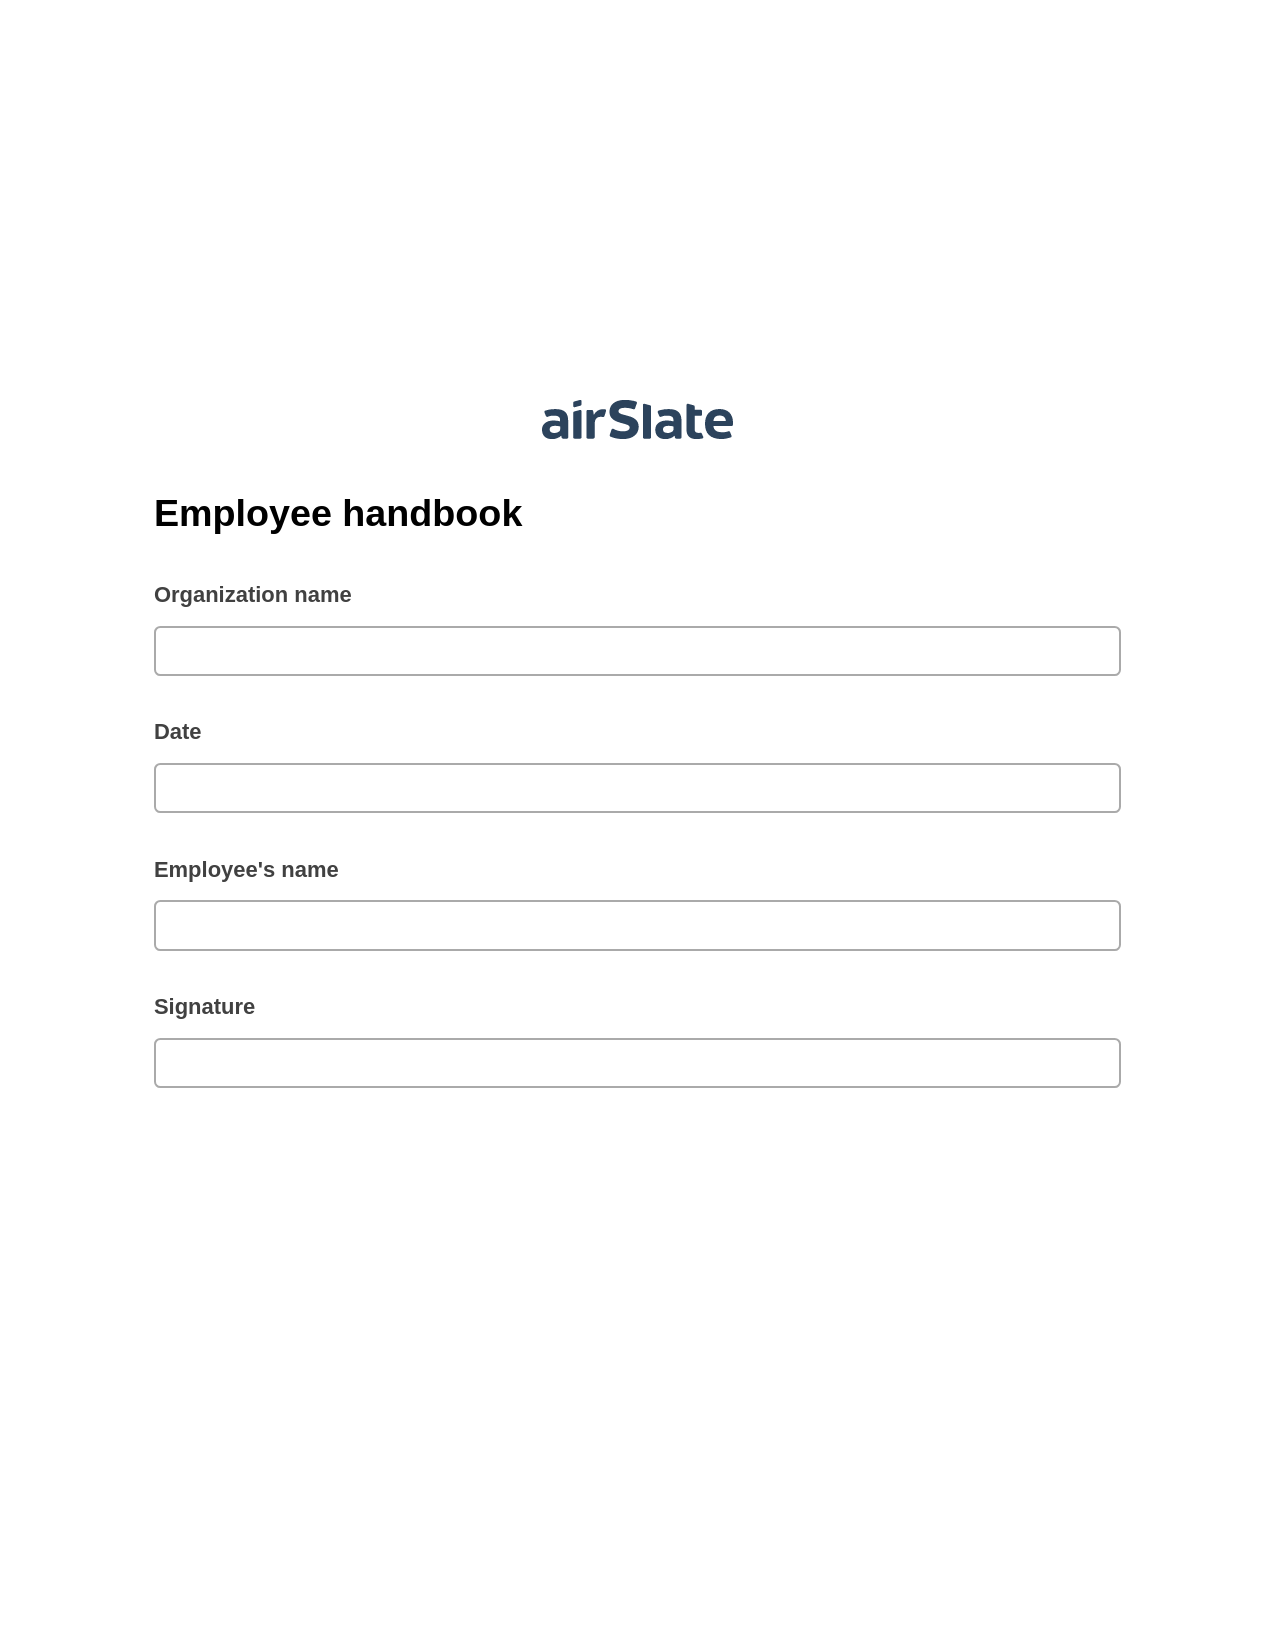 Employee handbook Pre-fill Dropdowns from Excel Bot, Create NetSuite Records Bot, Archive to SharePoint Folder Bot